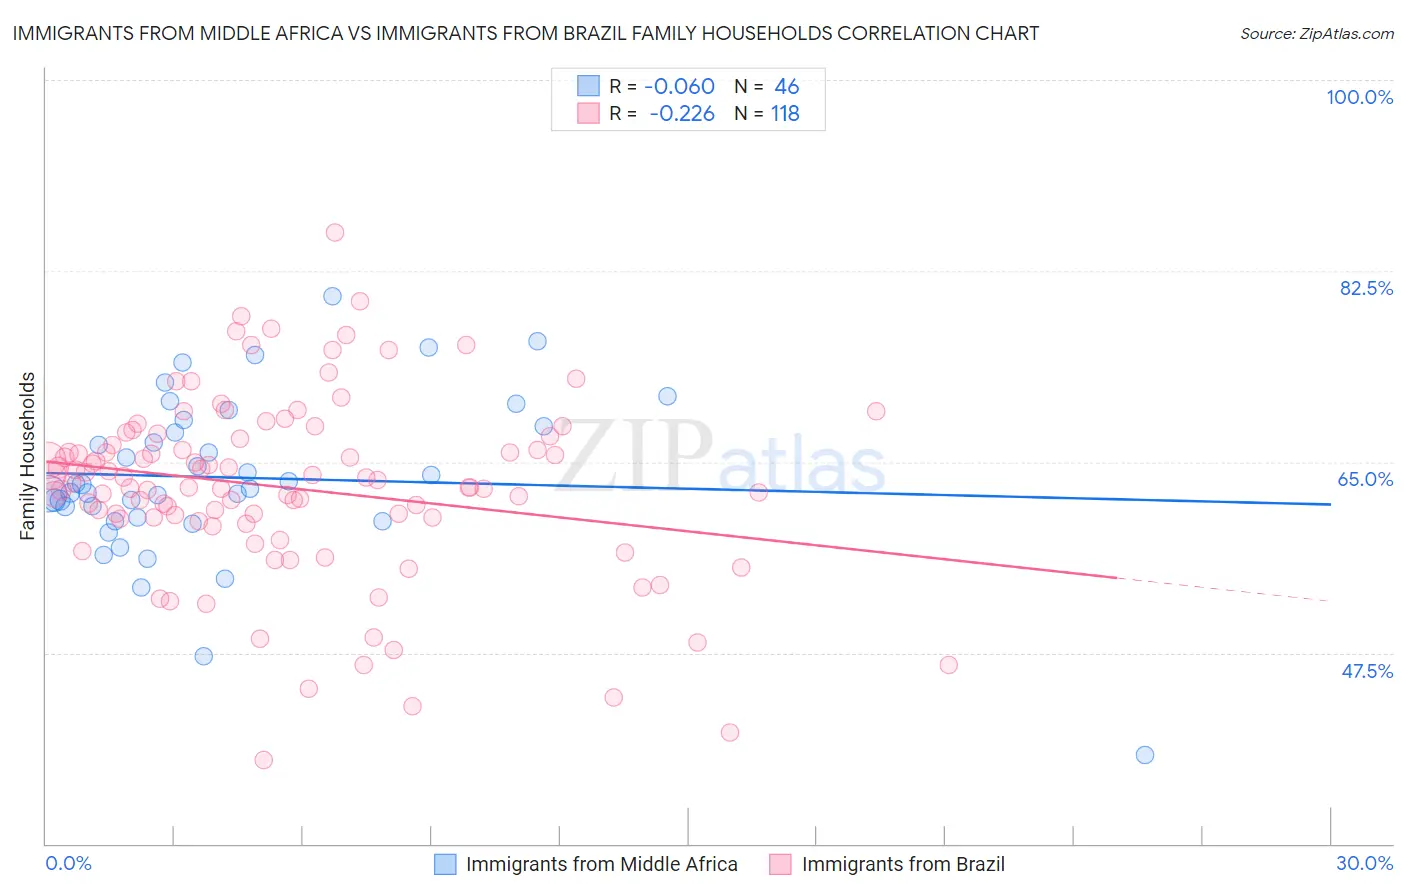 Immigrants from Middle Africa vs Immigrants from Brazil Family Households